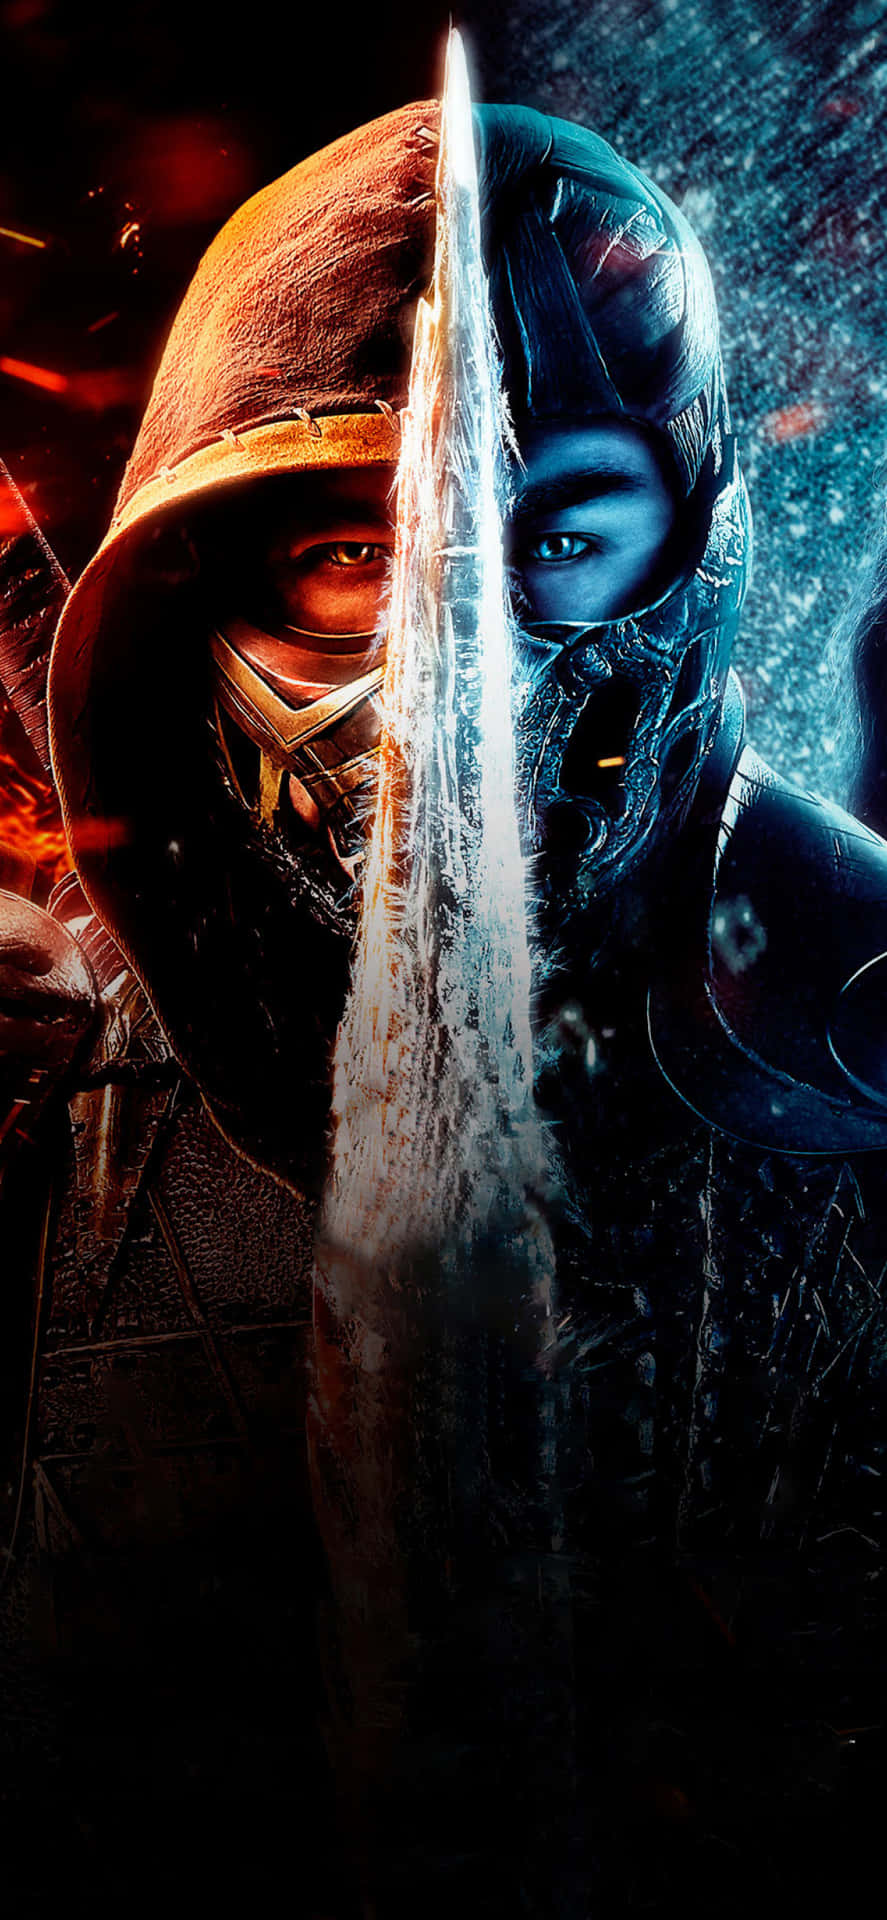 "Choose Your Fighter - Play Mortal Kombat On Your Iphone" Wallpaper